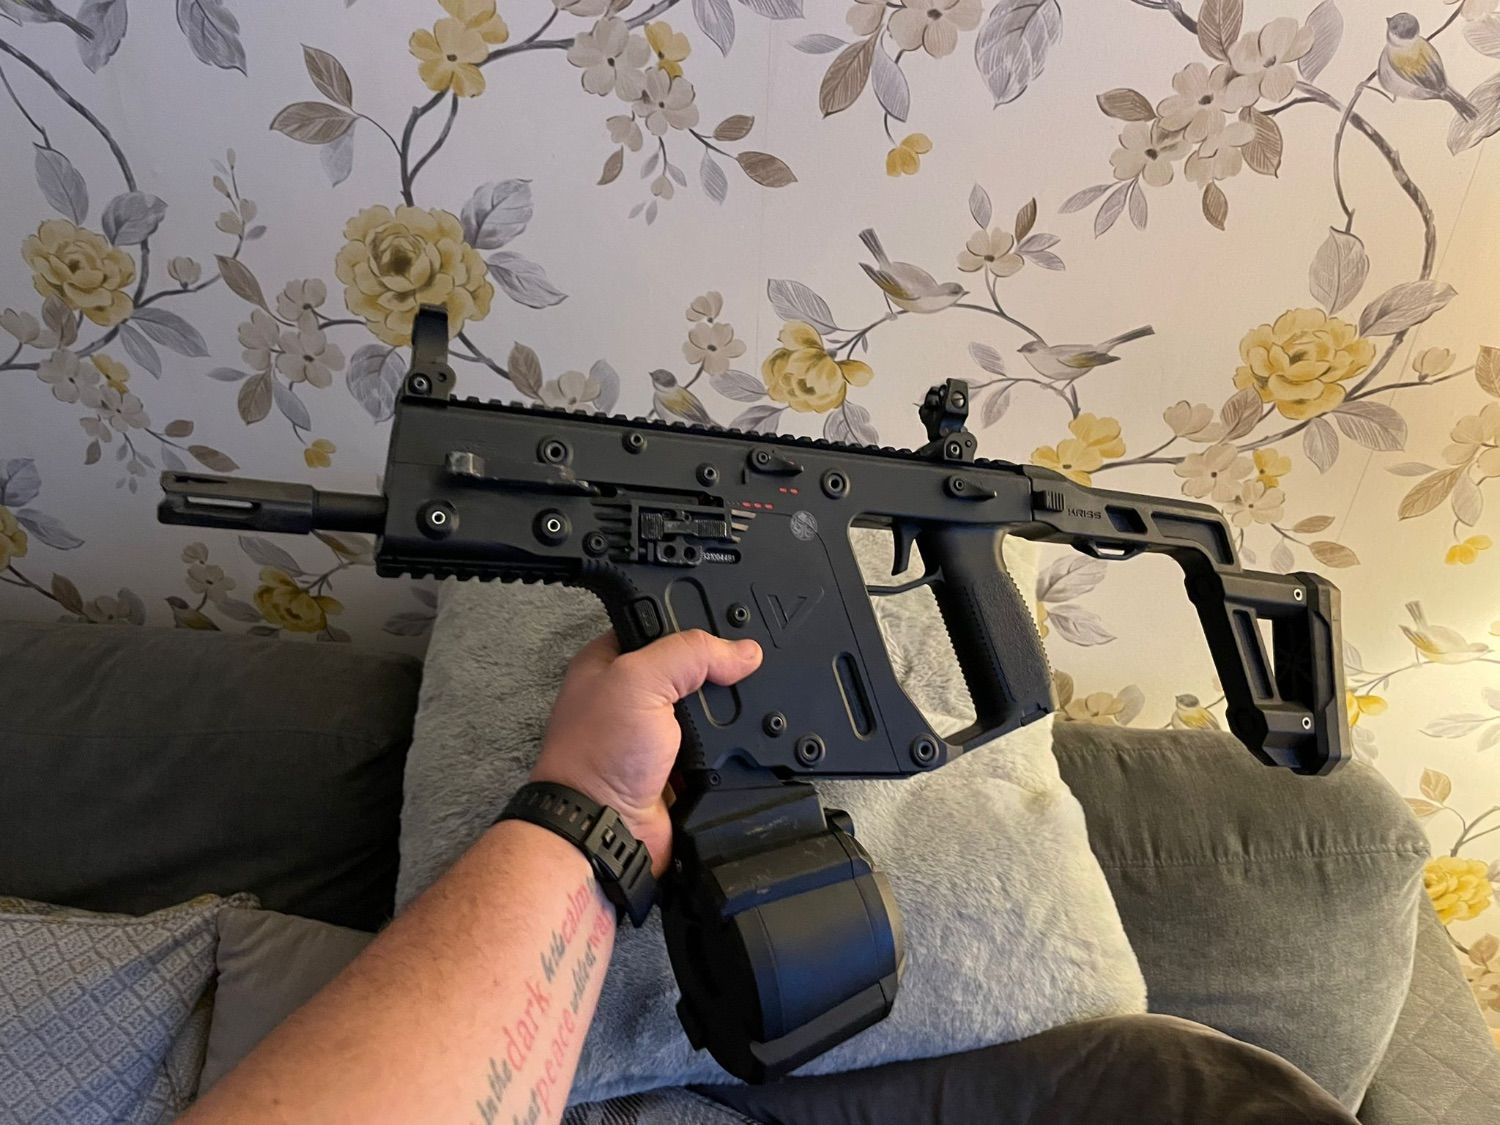 Krytac Kriss Vector, 9 mags + drum mag. - Electric Rifles - Airsoft